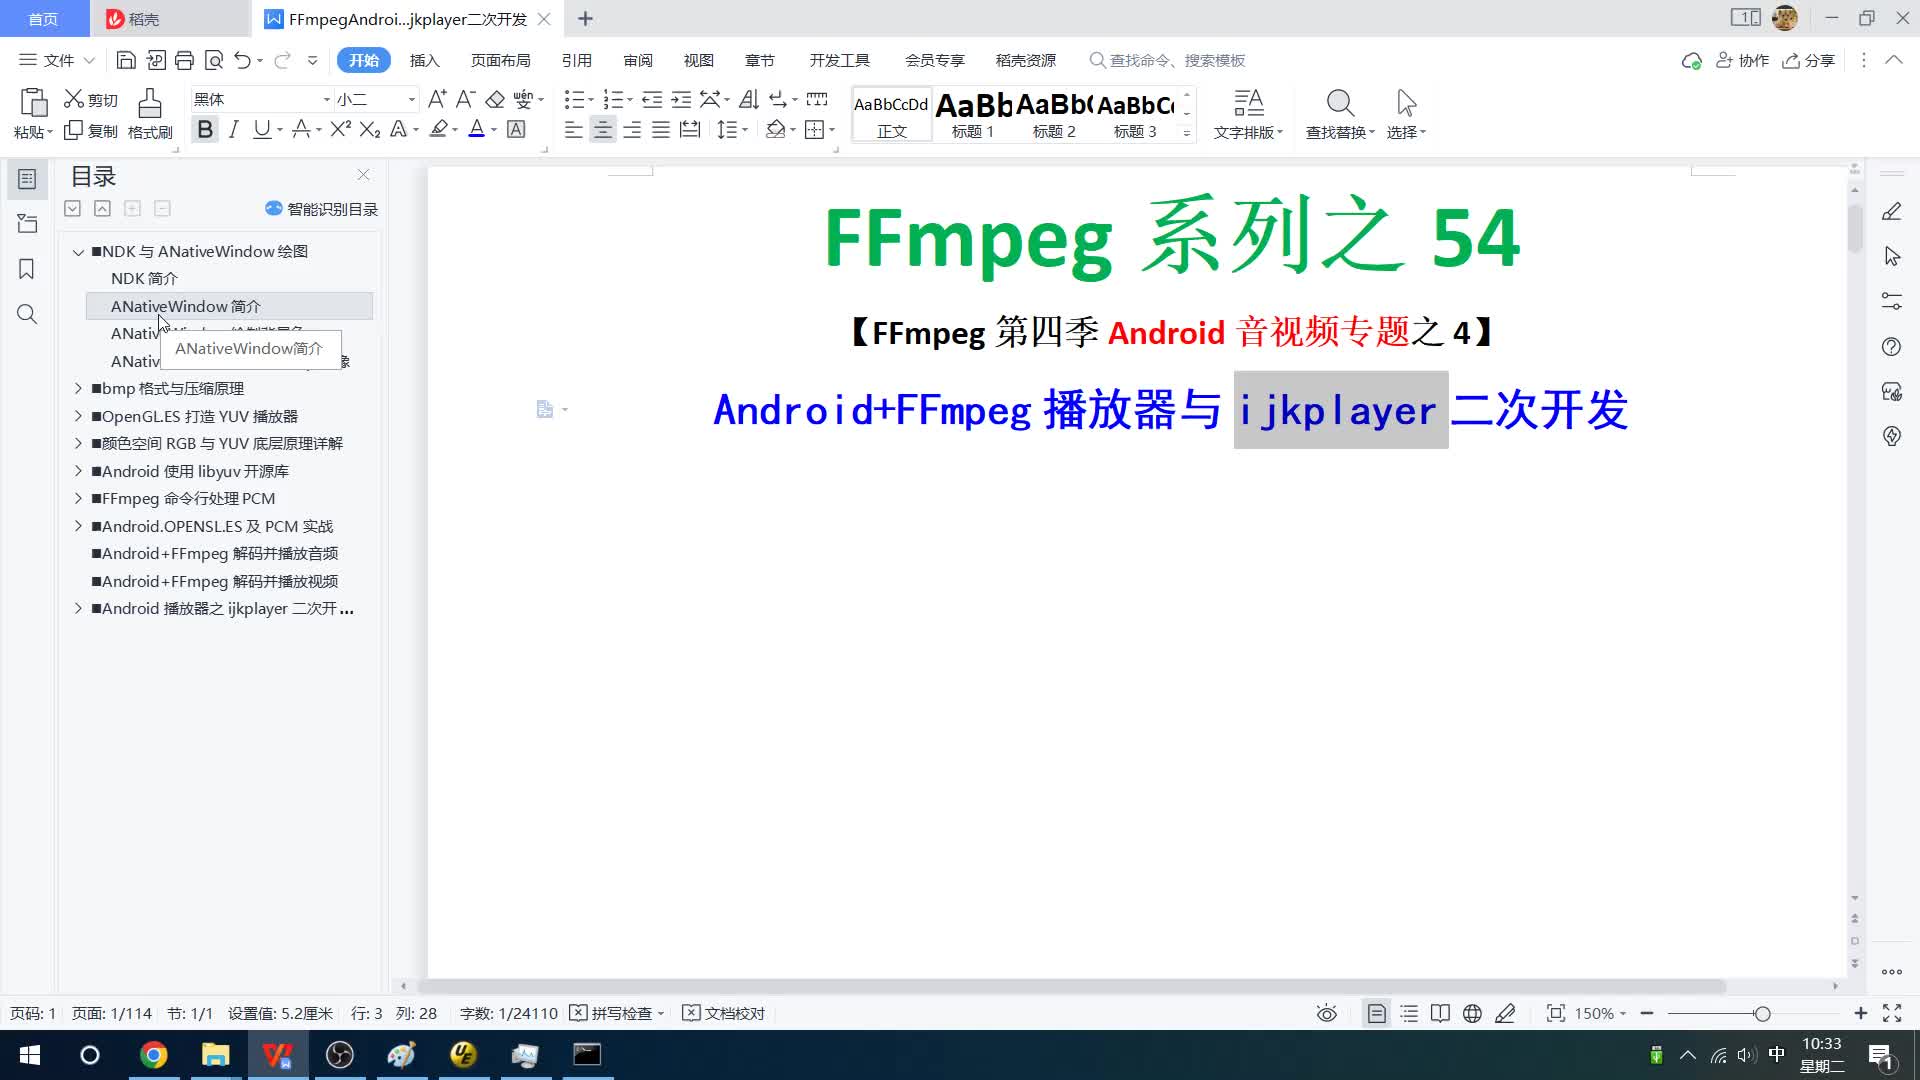 FFmpeg4.3系列之54：Android+FFmpeg播放器与ij